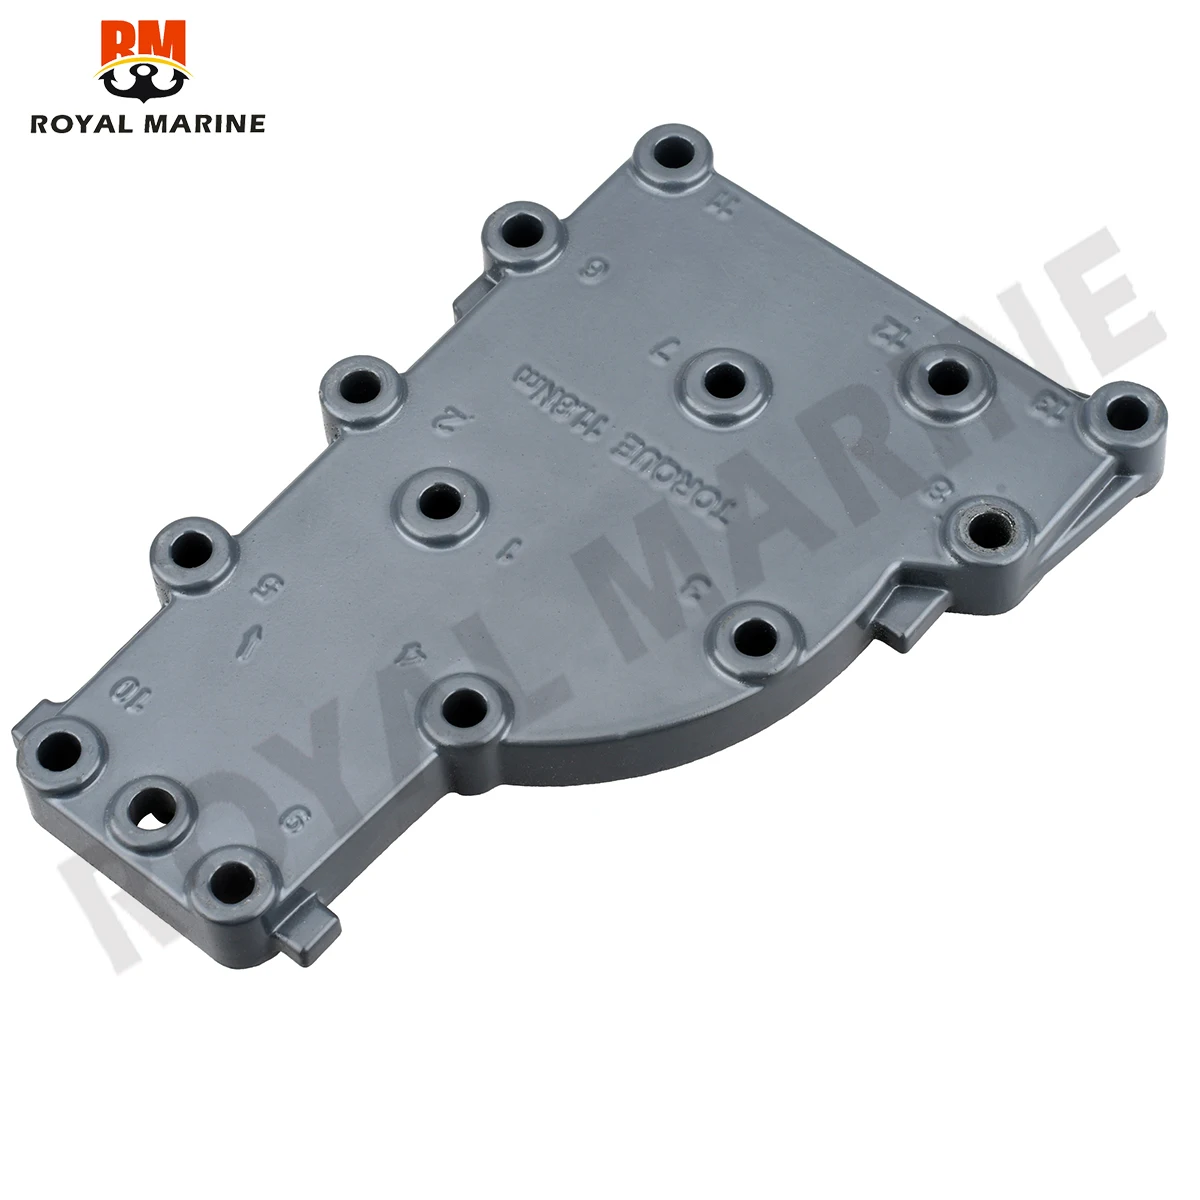 63V-41113-00-9M Outer Cover, Exhaust for yamaha outboard motor 2T 9.9HP 15HP 63V-41113-00 63V-41113 boat engine parts